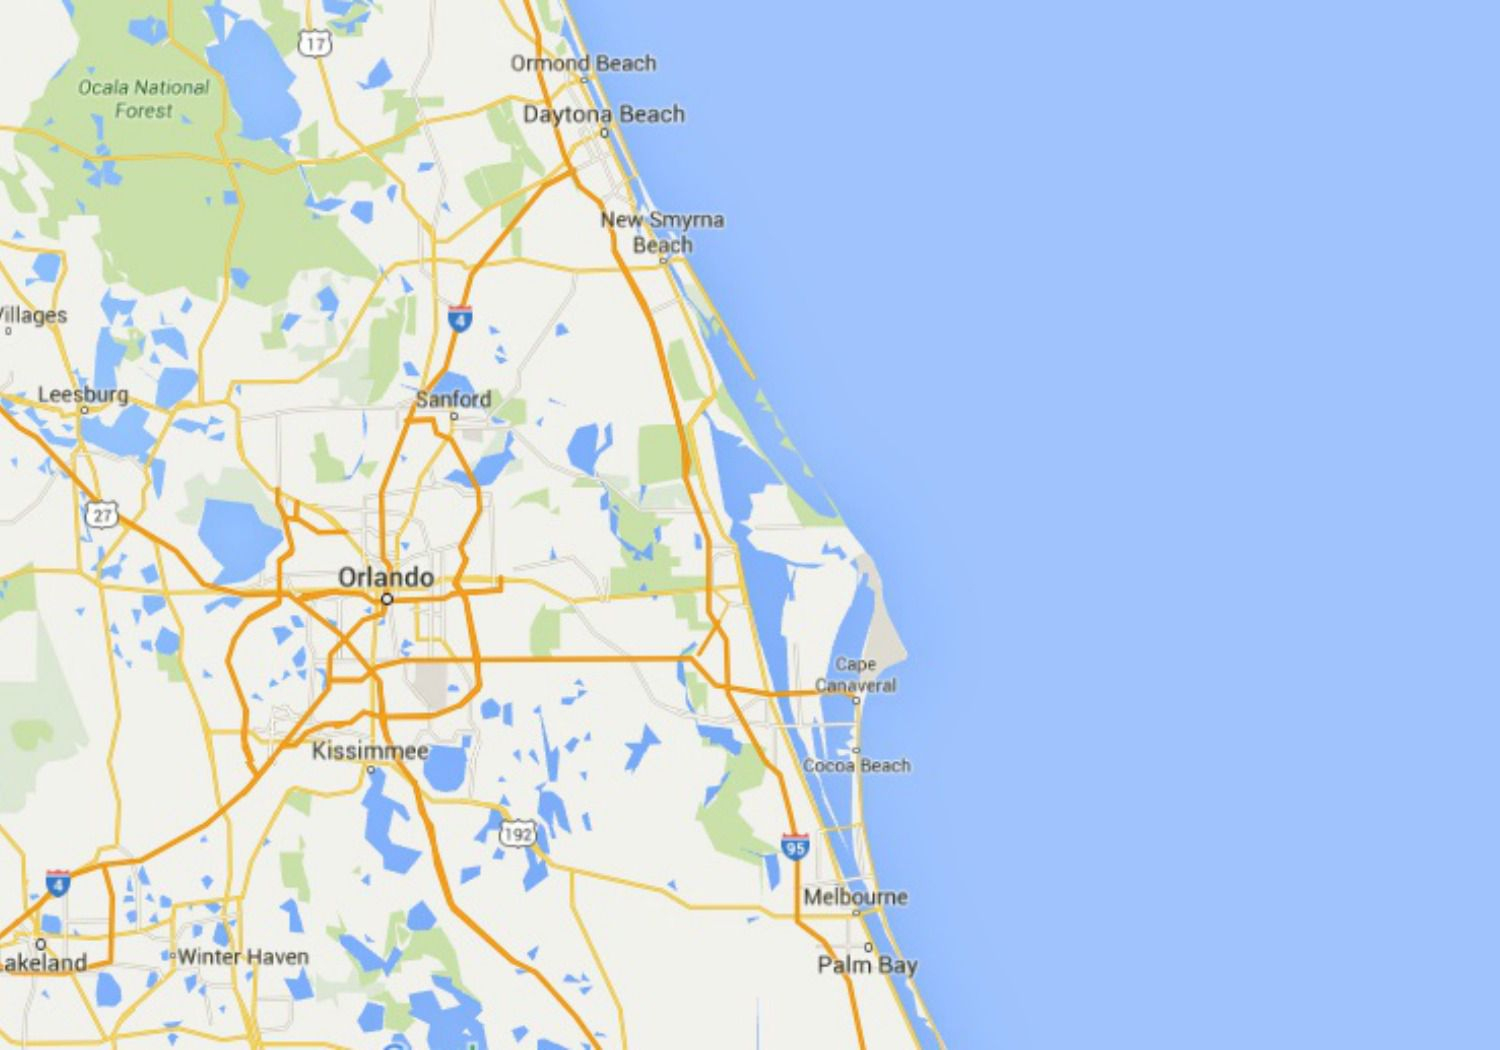 Maps Of Florida: Orlando, Tampa, Miami, Keys, And More - Google Maps Clearwater Beach Florida